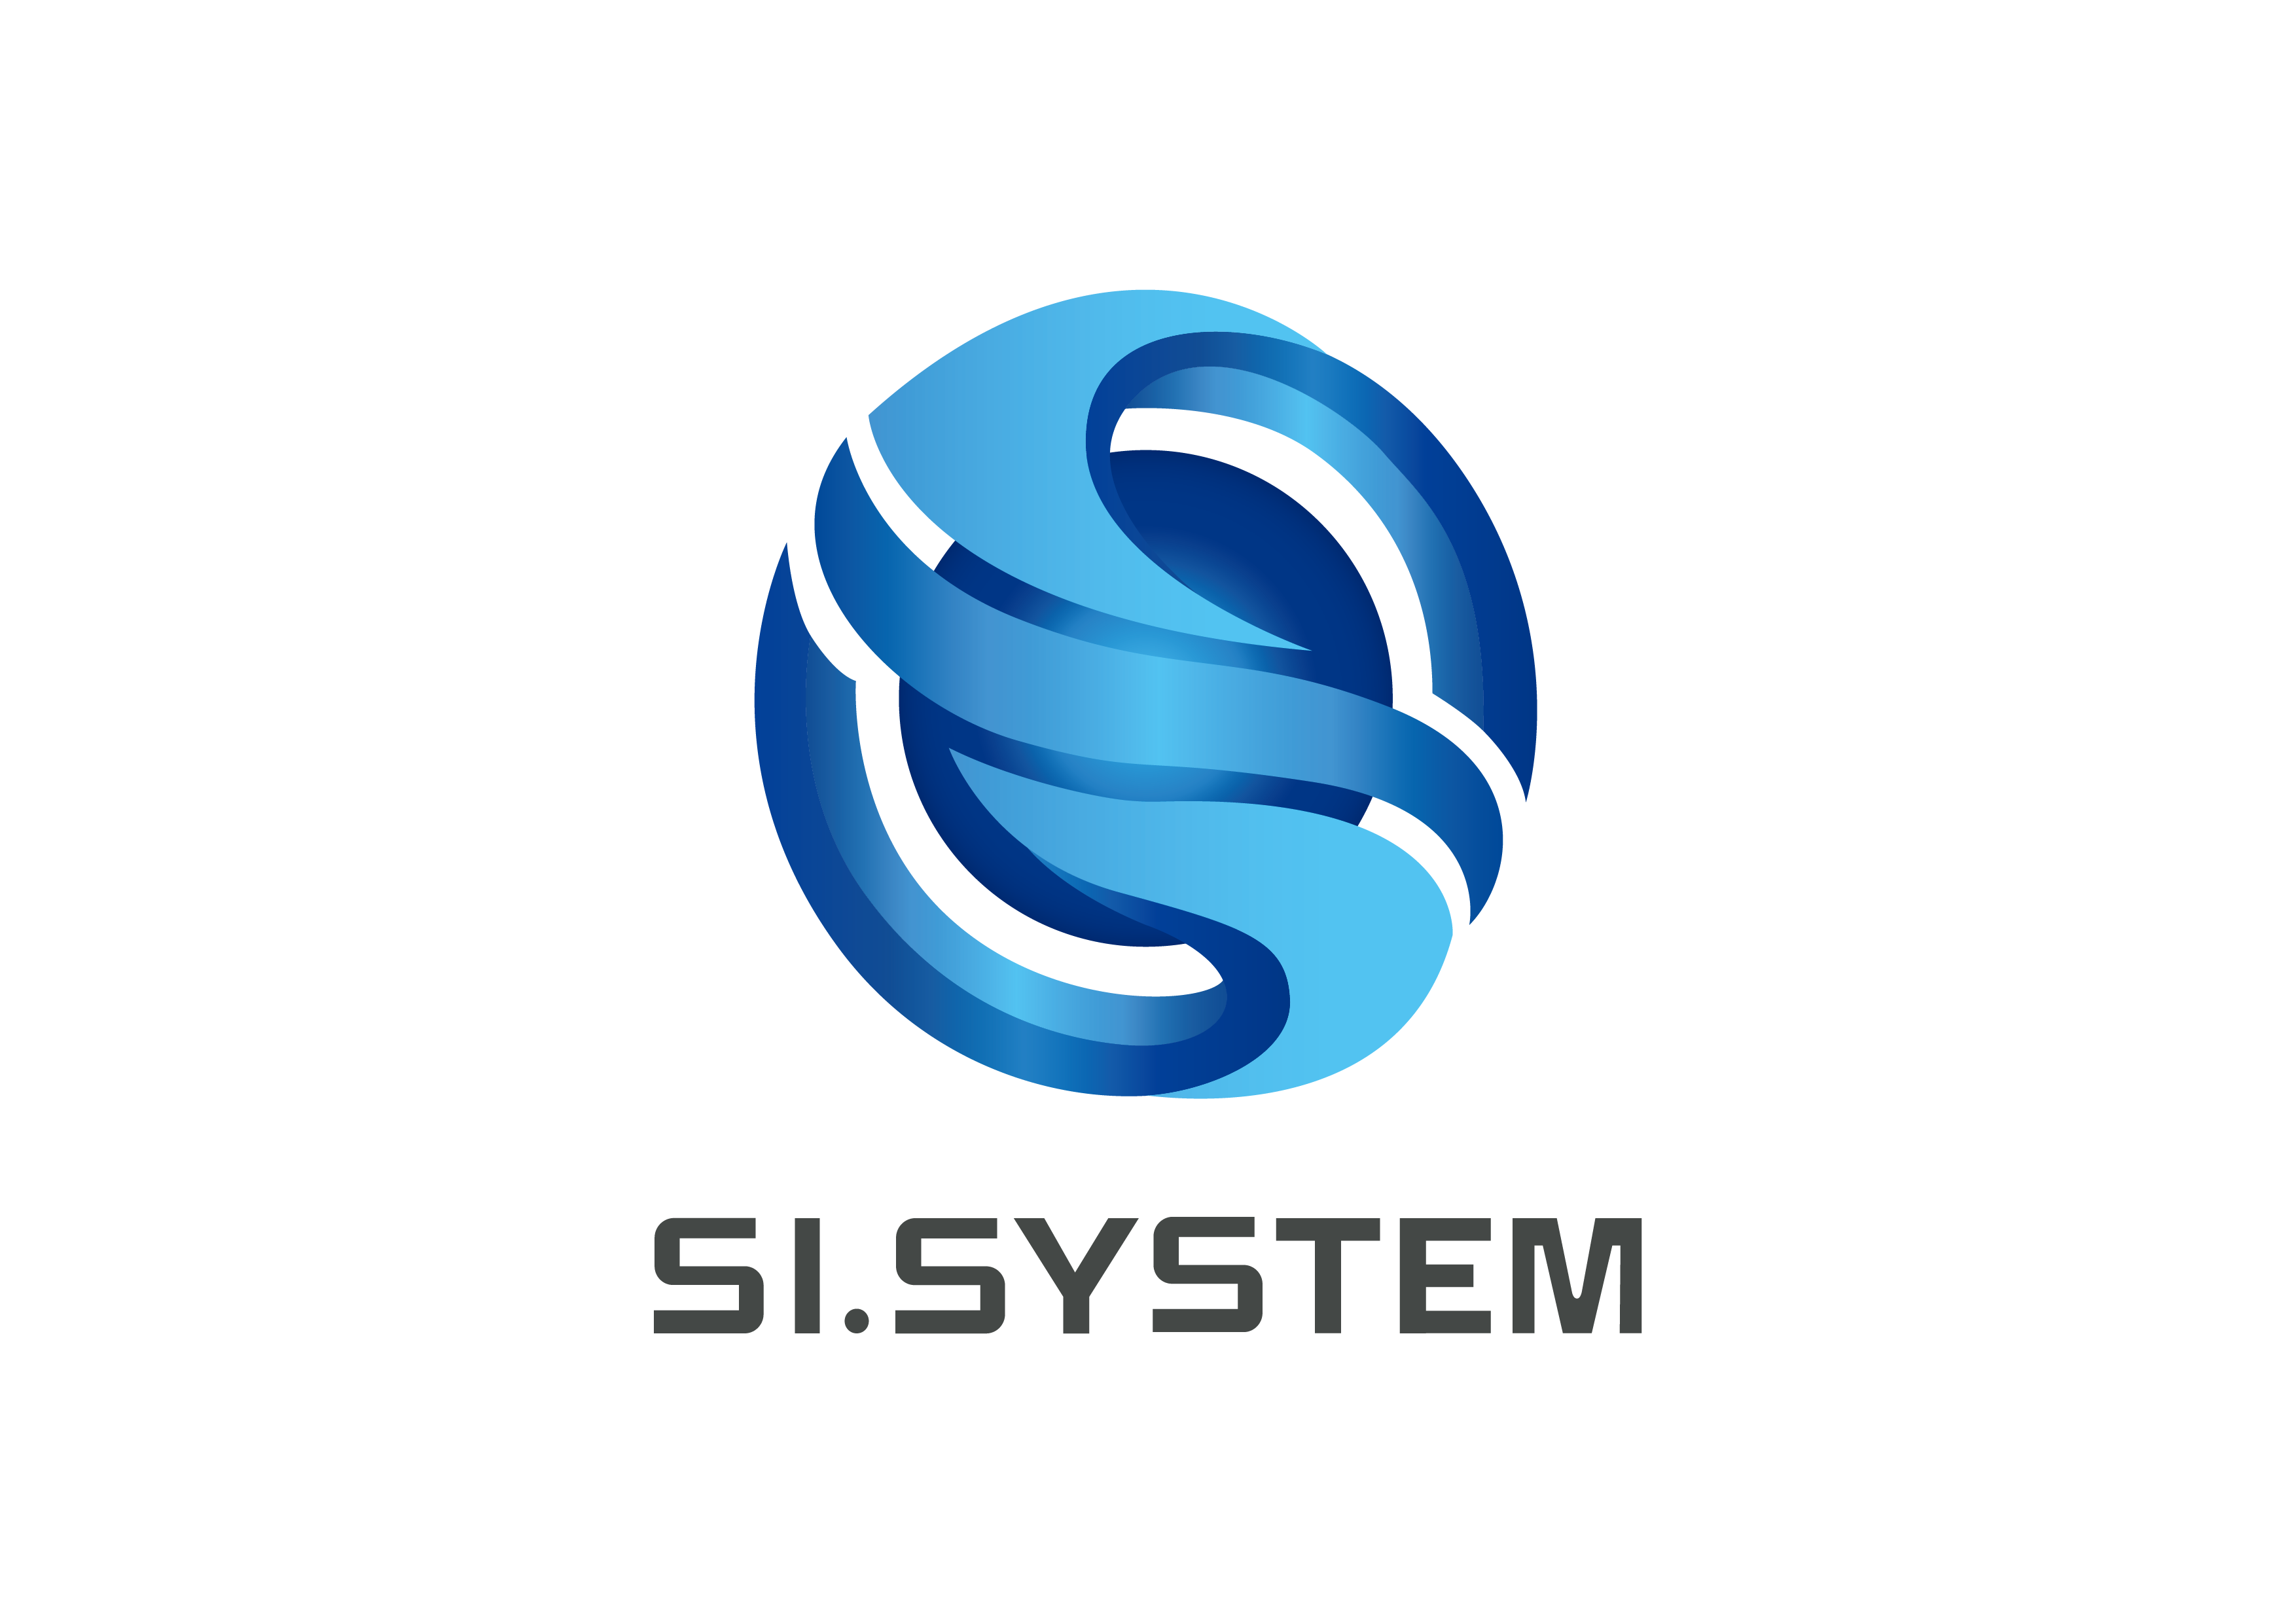 SI SYSTEM